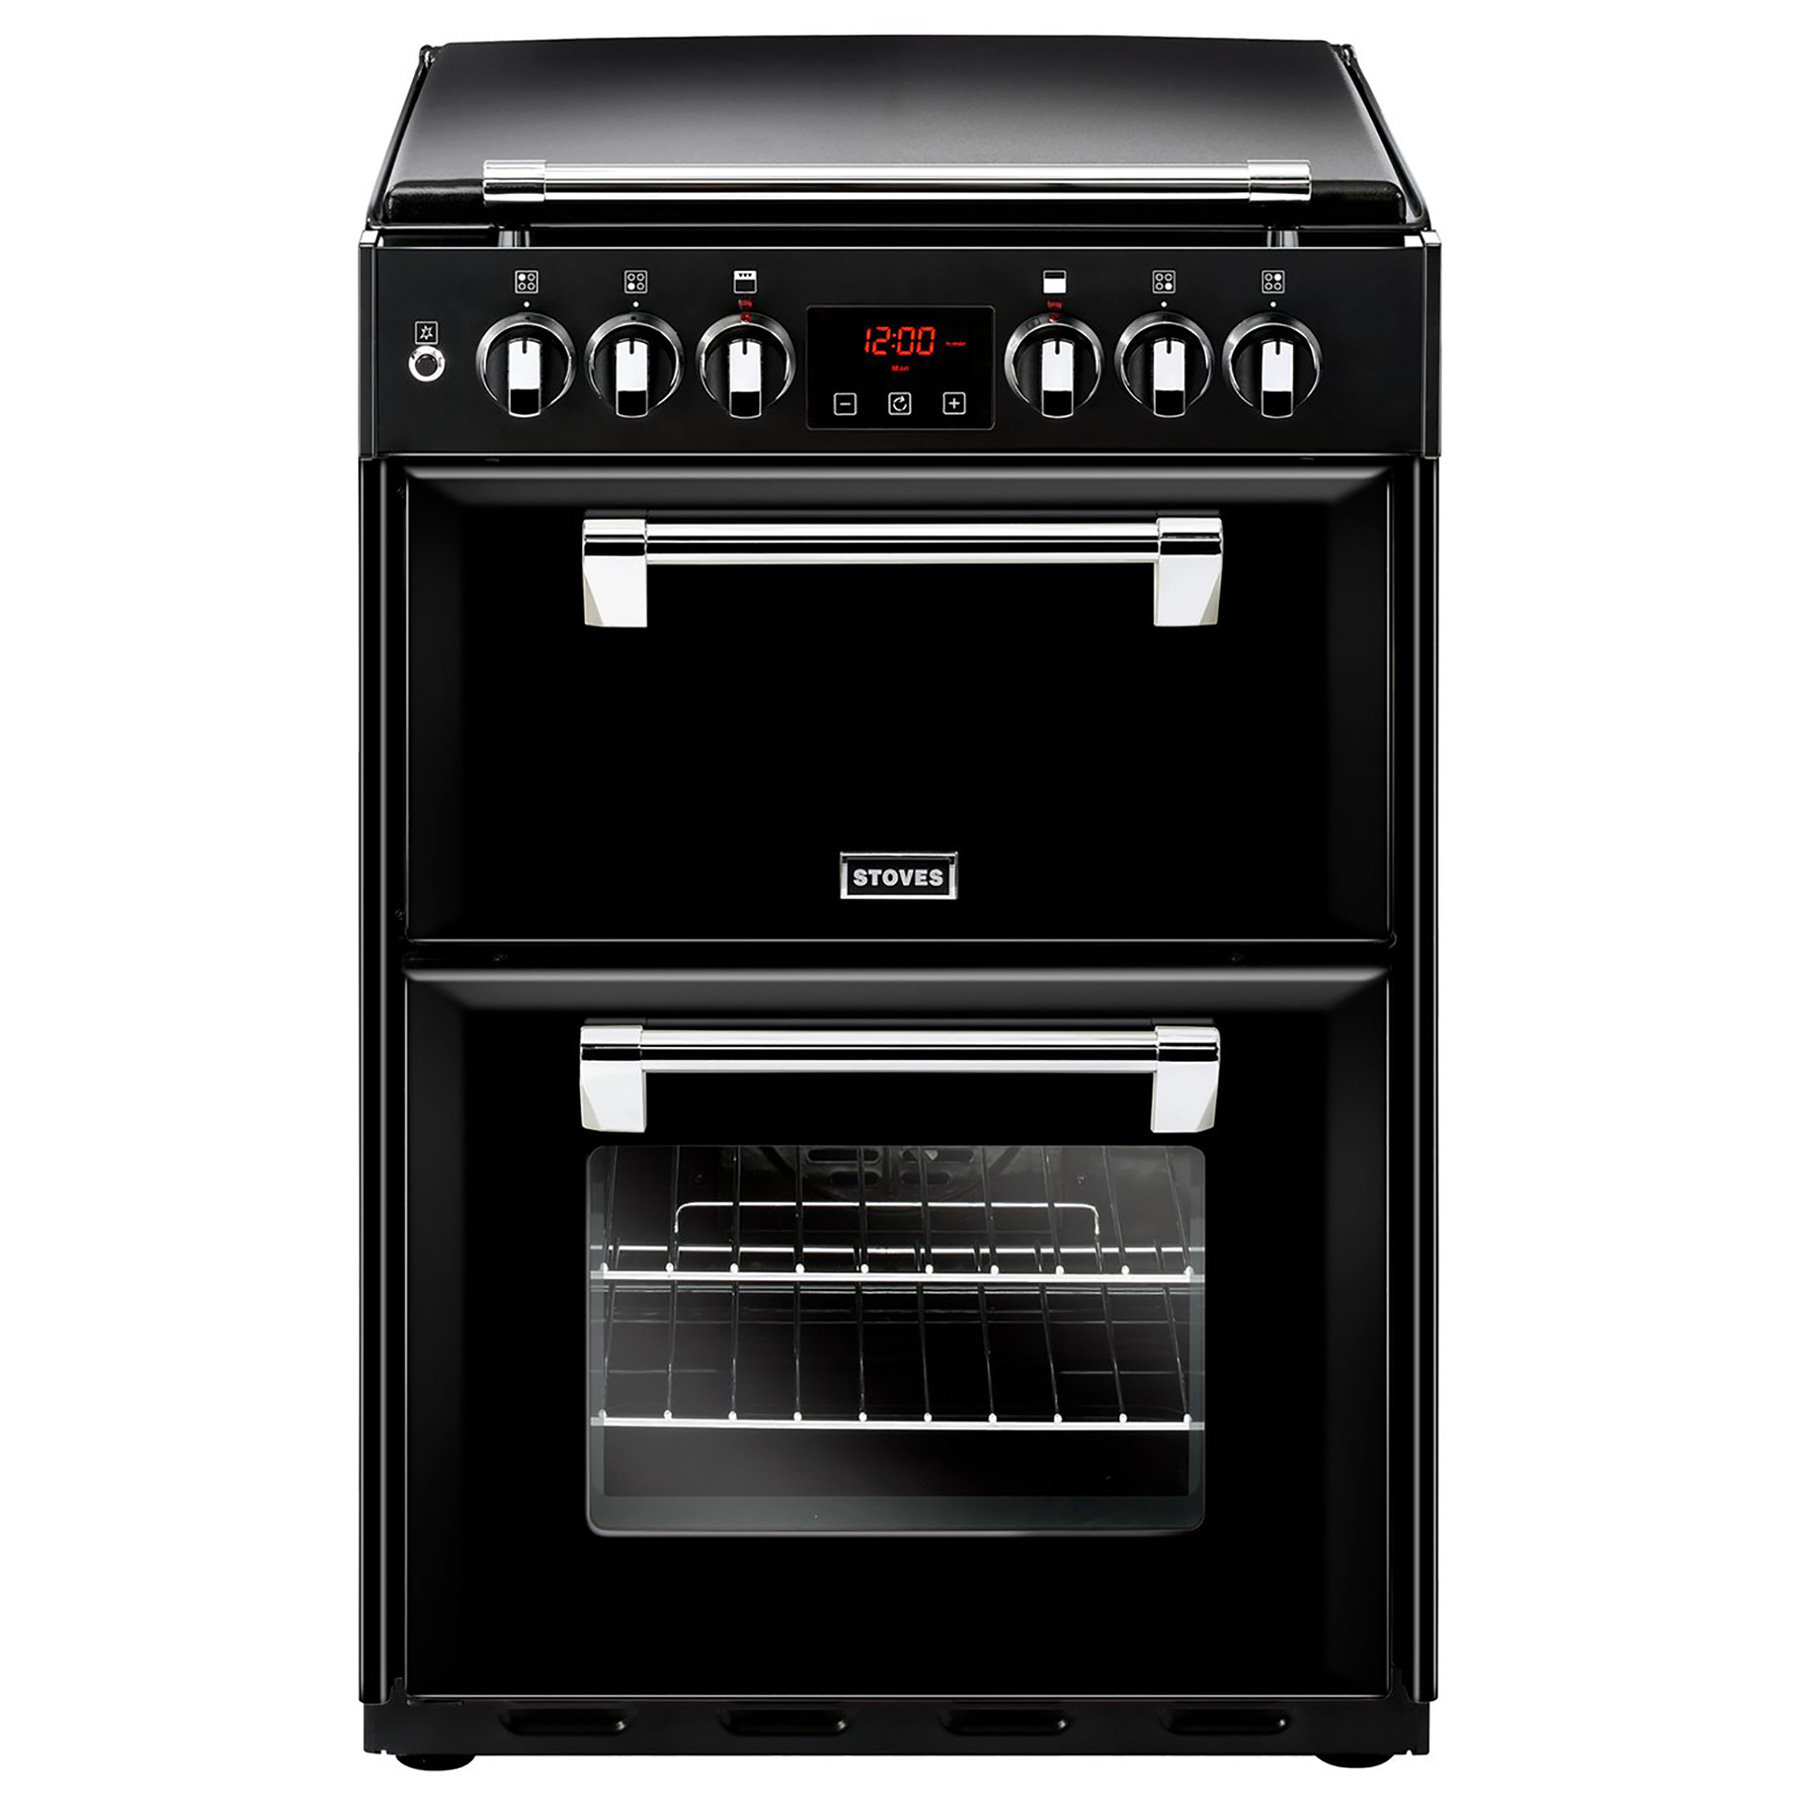 Stoves 444444723 60cm RICHMOND 600DF D Oven Dual Fuel Cooker in Black